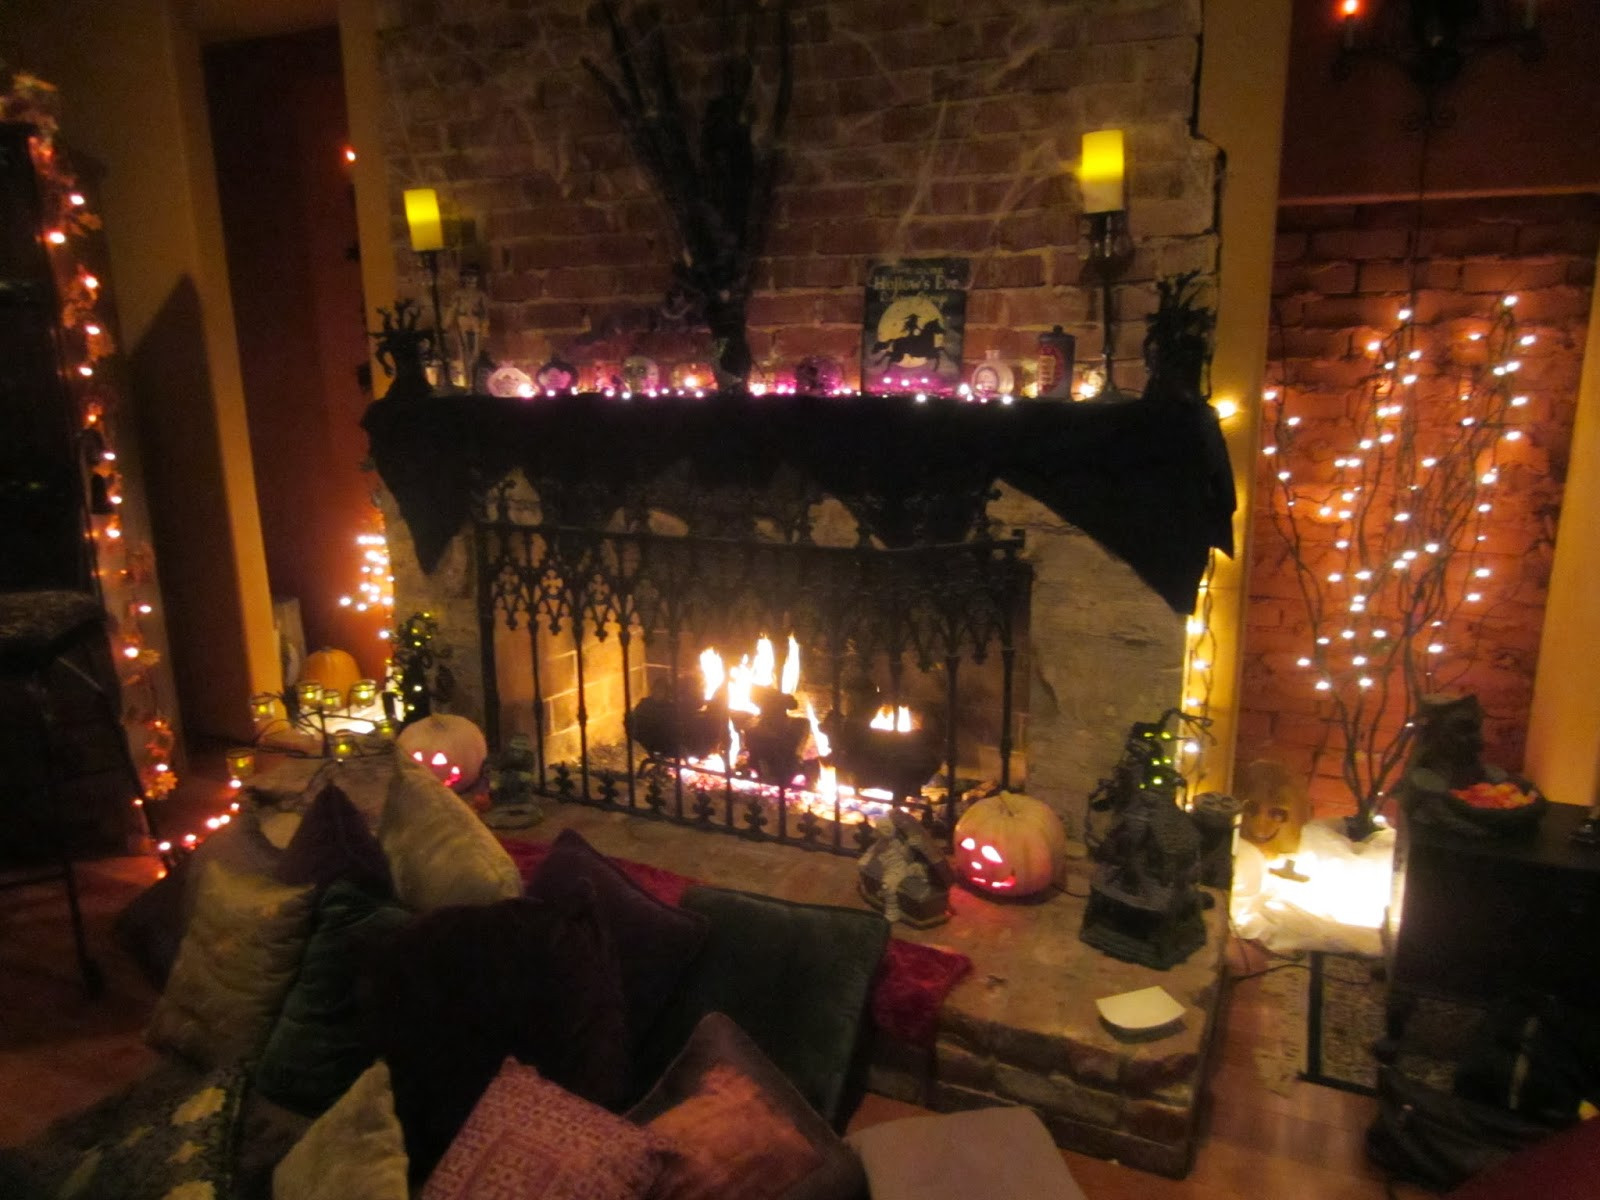 Halloween Decorating Party Ideas
 Hd Wallpapers Blog Halloween Party Decorating Ideas